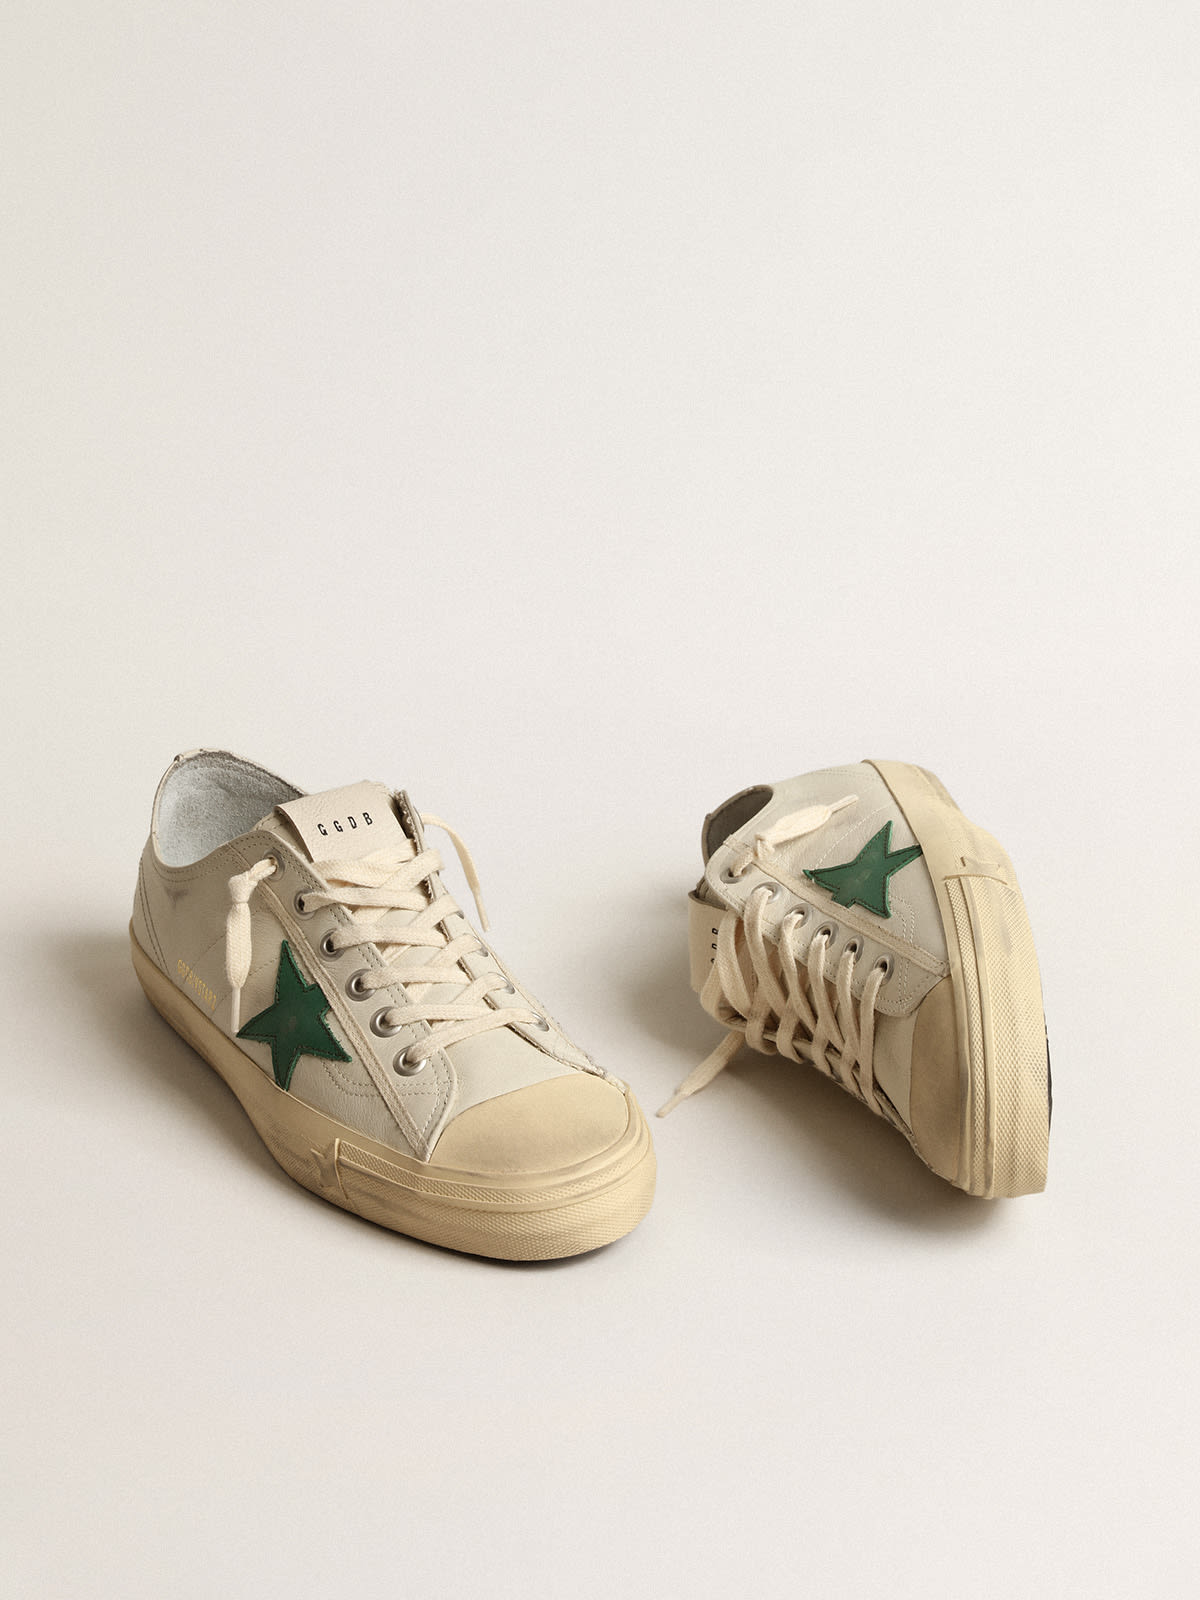 Golden Goose - V-Star in glossy leather with green leather star in 